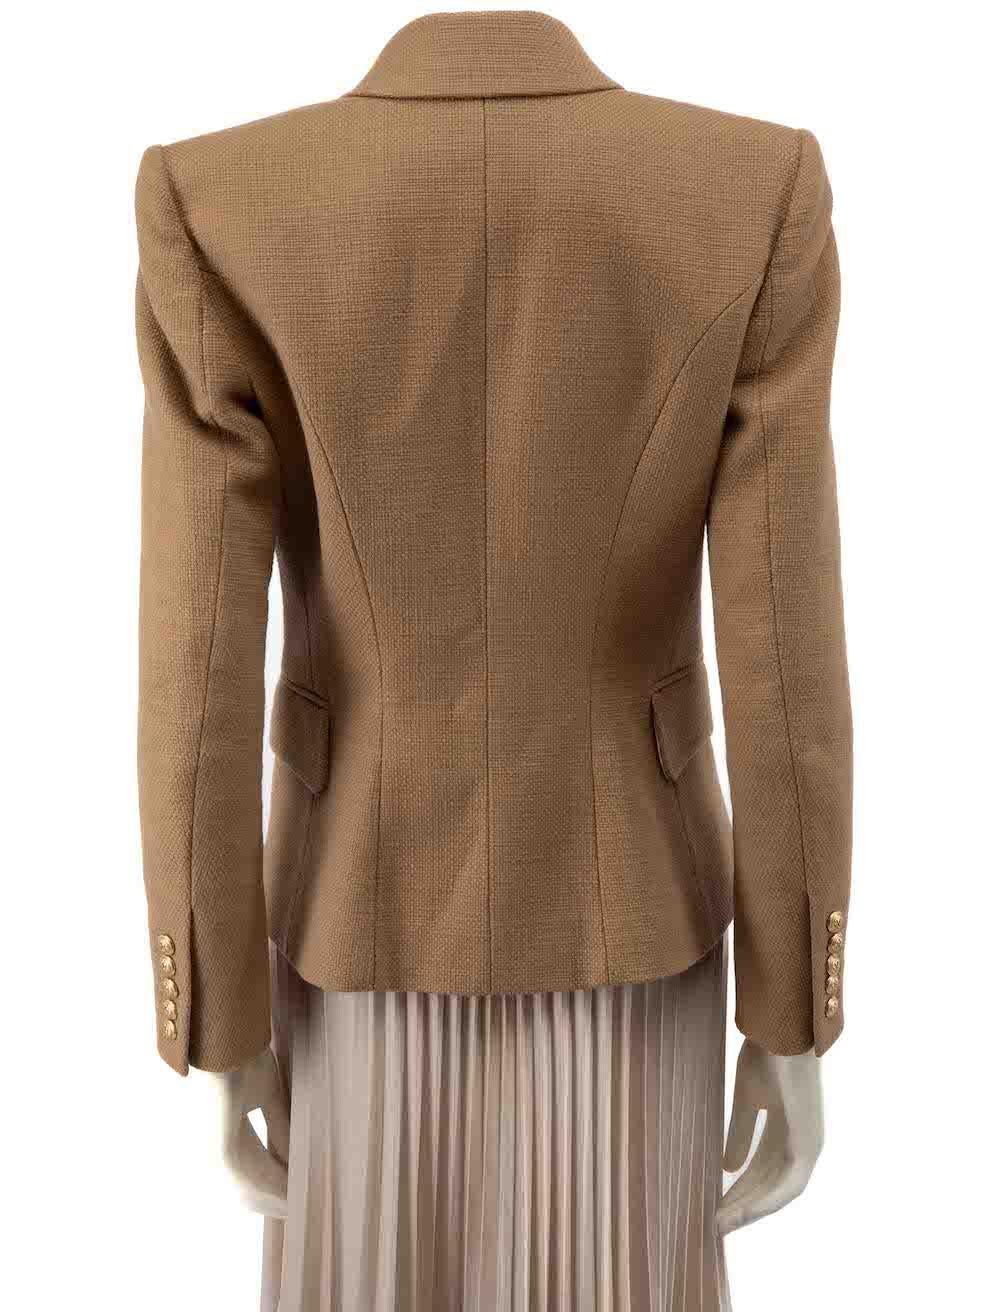 Balmain Brown Double-Breasted Blazer Size L In Excellent Condition For Sale In London, GB